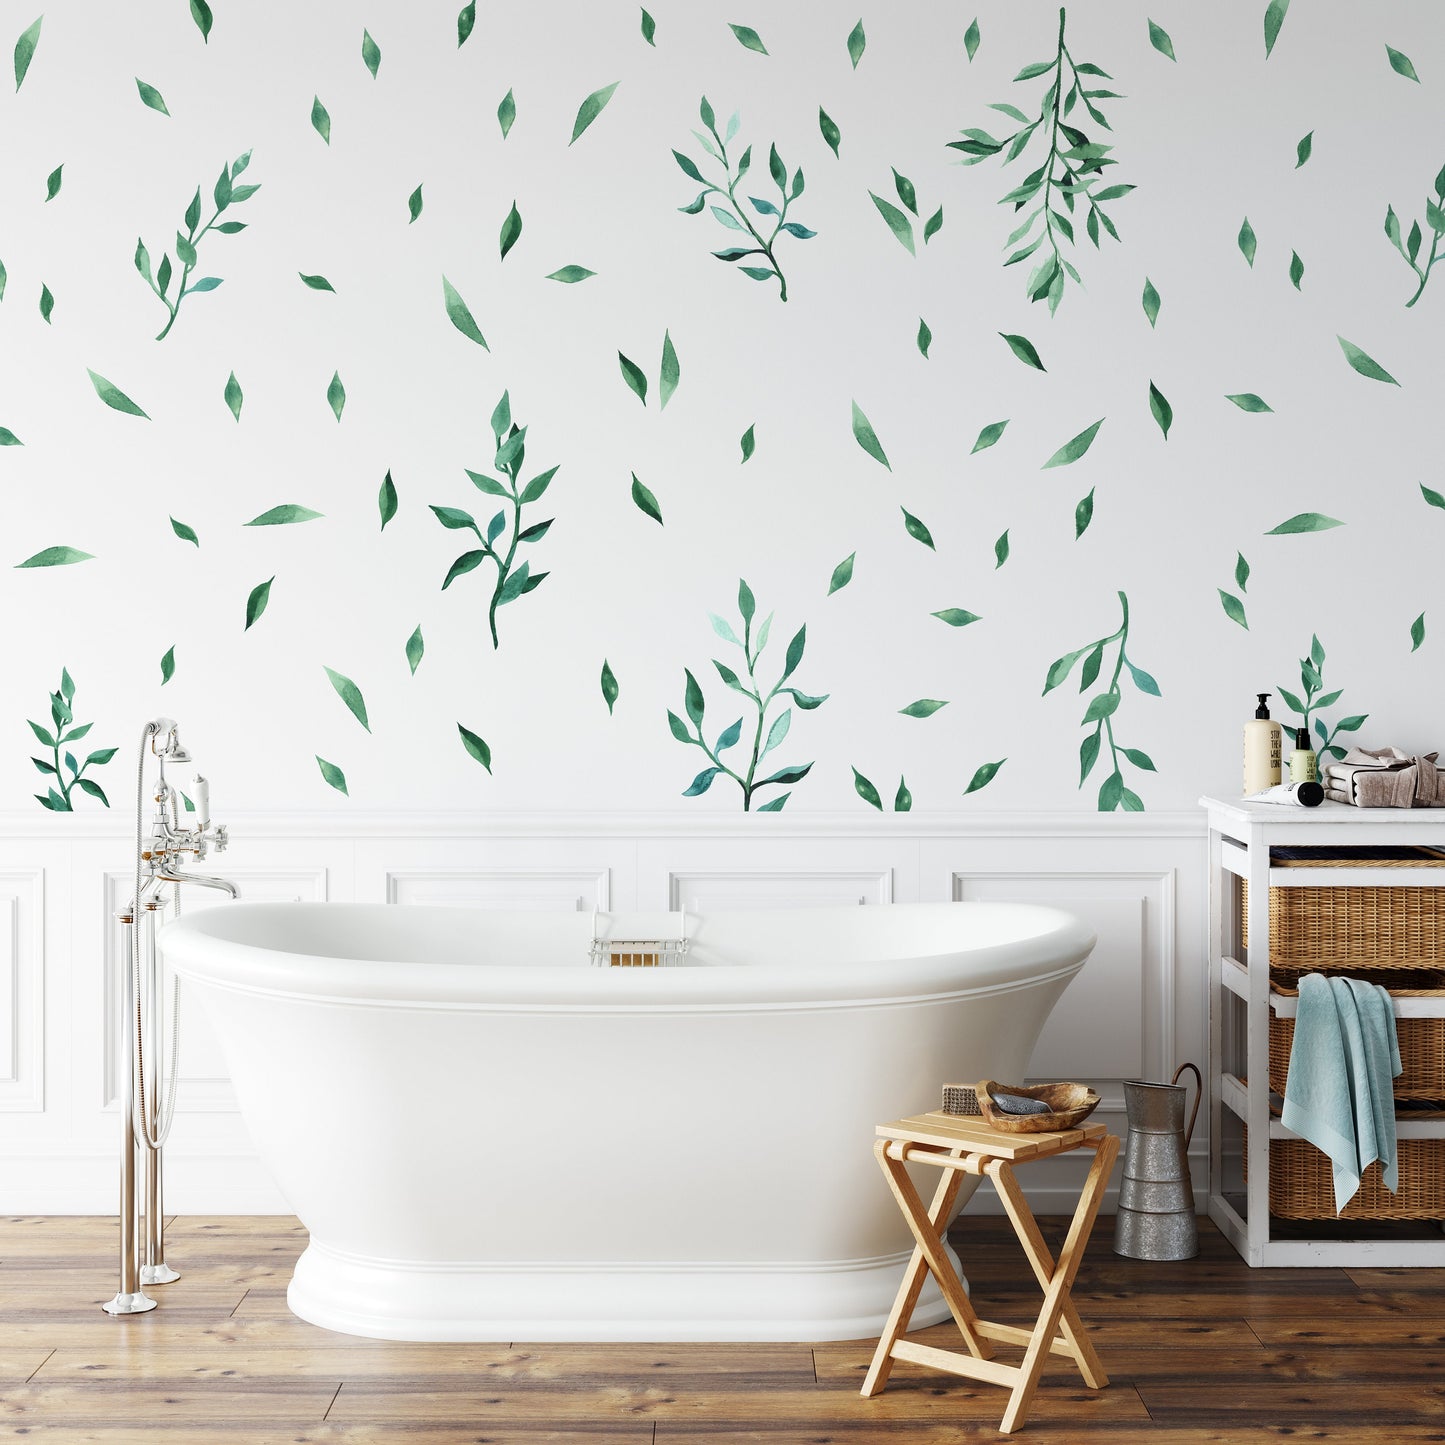 Greenery Wall Decals Watercolor Sticker Green Leaves Room Decor Stickers, LF145